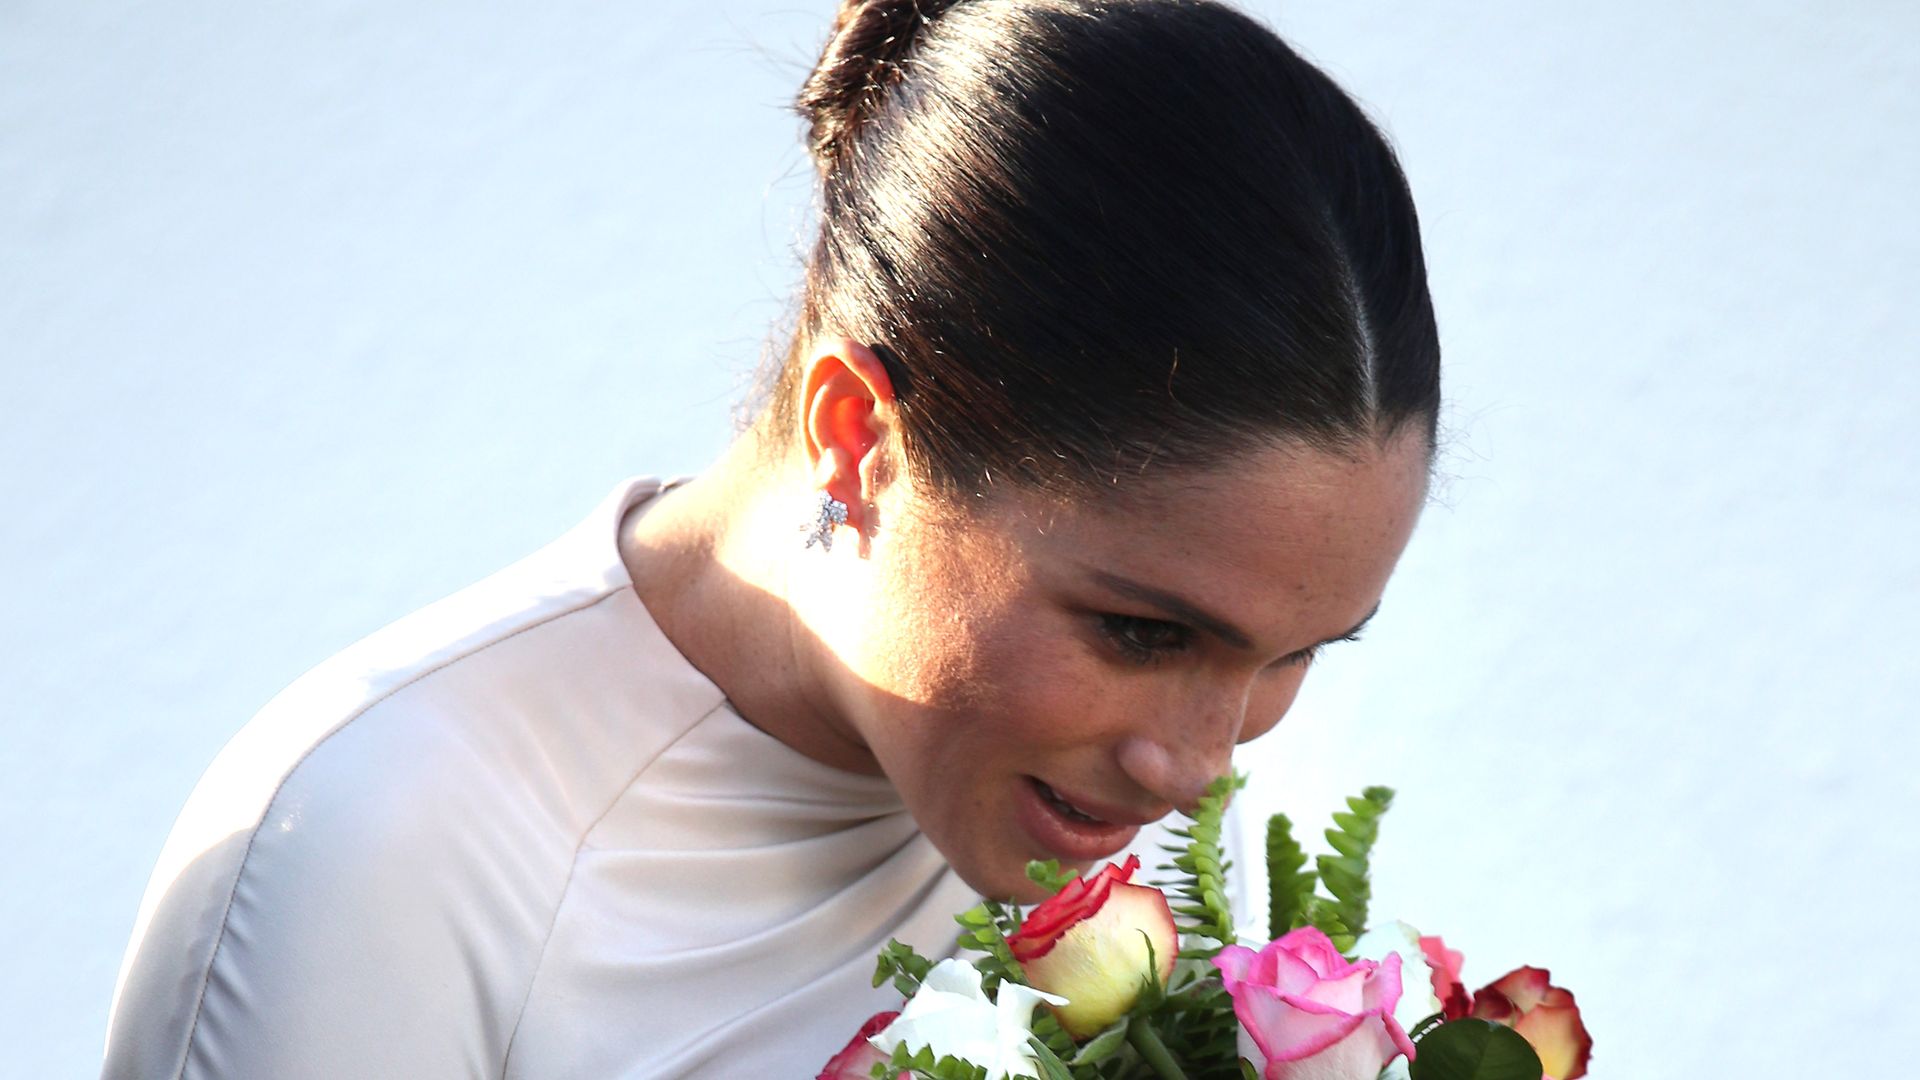 meghan markle with flowers